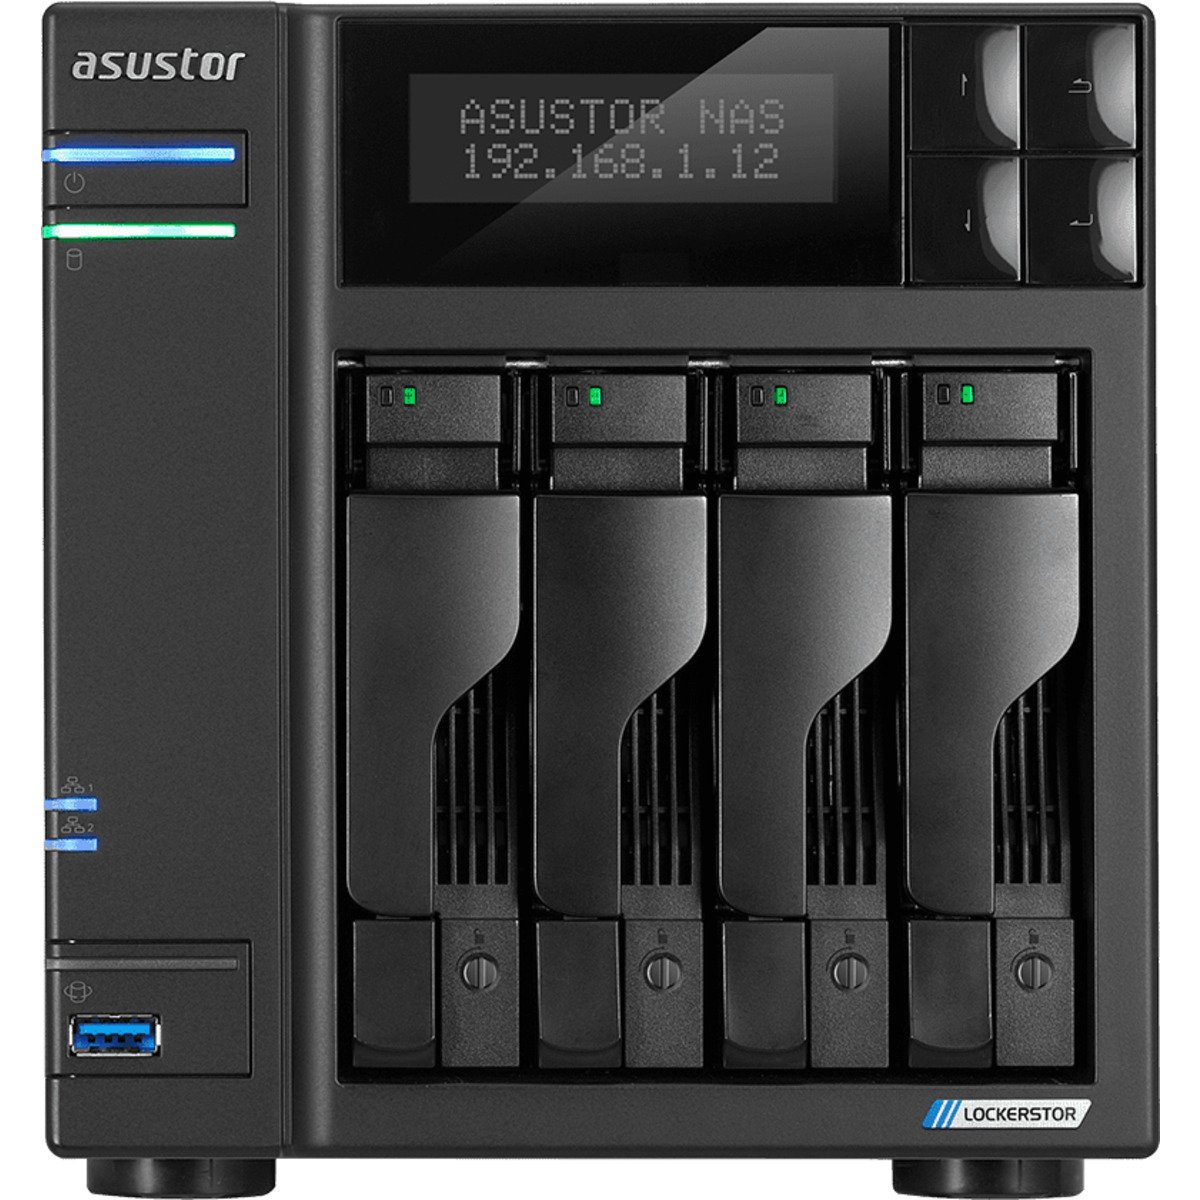 ASUSTOR AS6604T Lockerstor 4 24tb 4-Bay Desktop Multimedia / Power User / Business NAS - Network Attached Storage Device 3x8tb Seagate IronWolf Pro ST8000NT001 3.5 7200rpm SATA 6Gb/s HDD NAS Class Drives Installed - Burn-In Tested - ON SALE - FREE RAM UPGRADE AS6604T Lockerstor 4